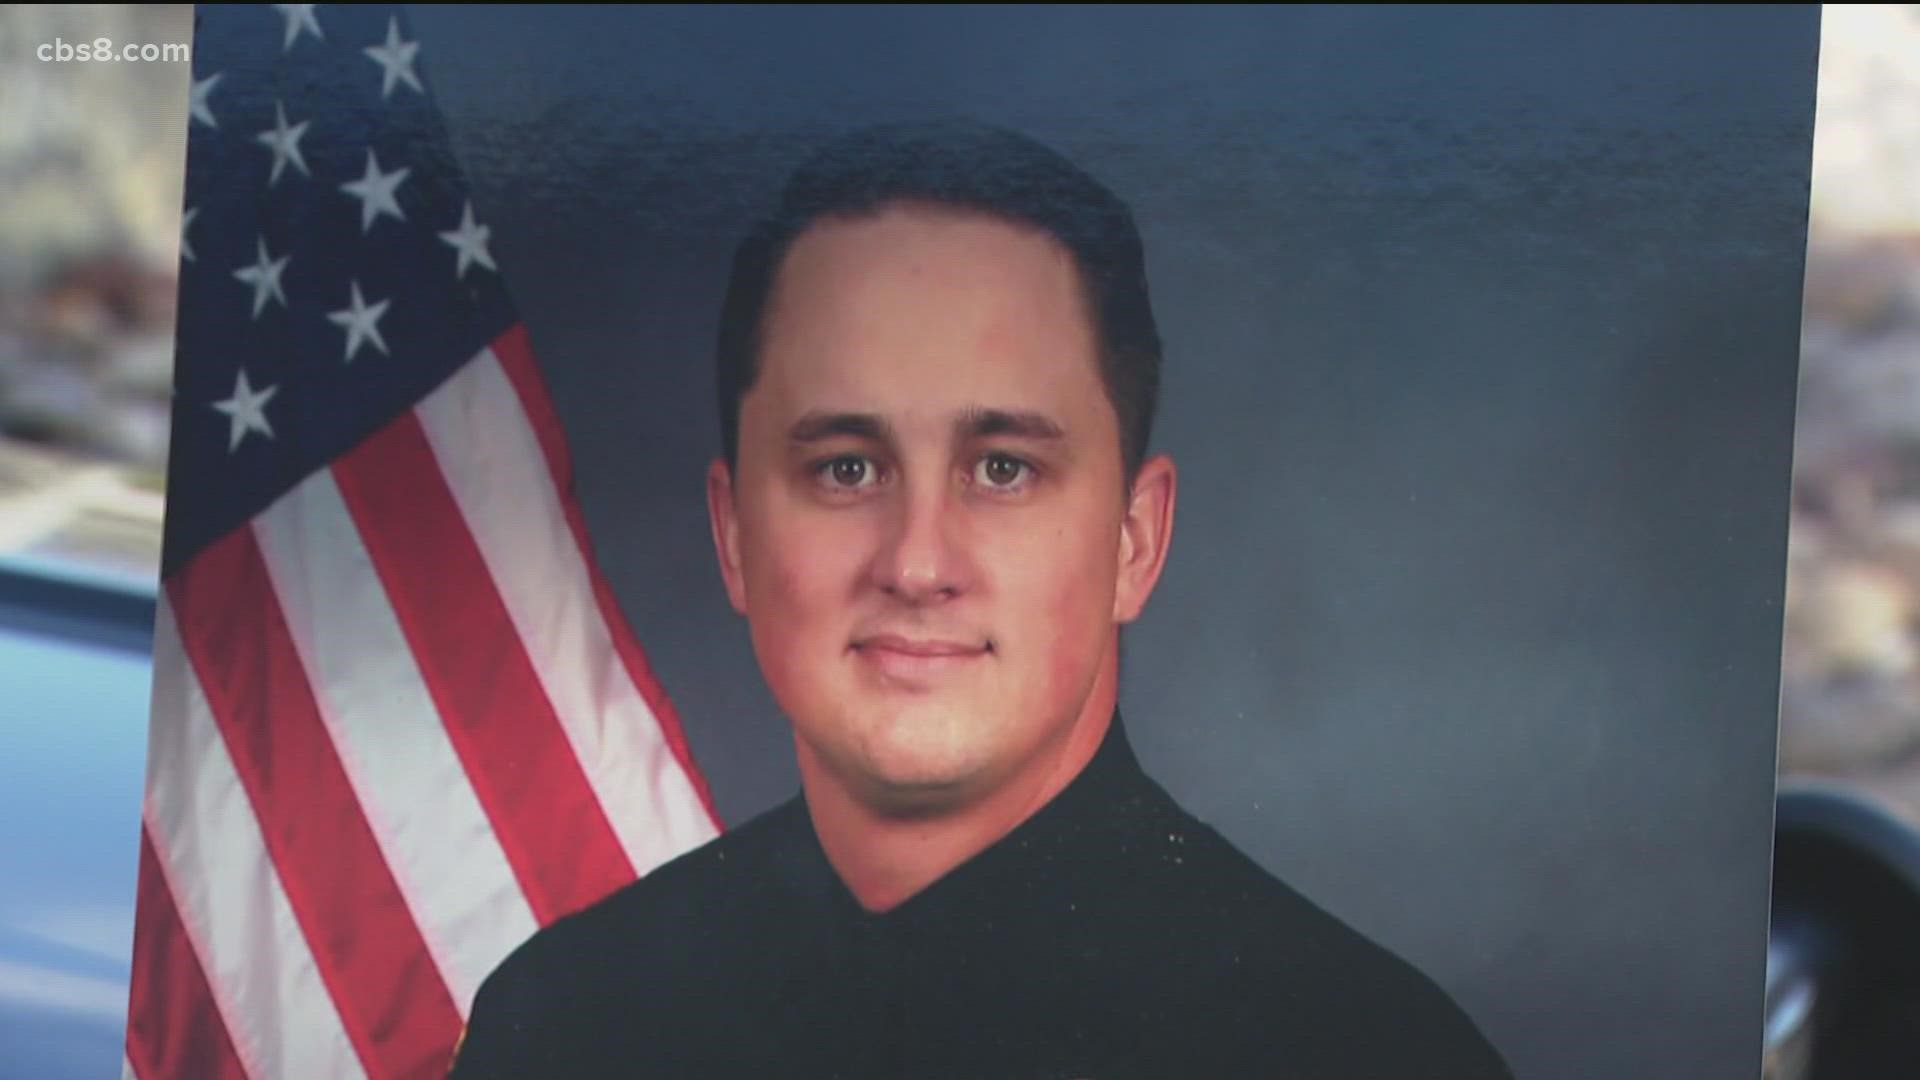 Officer Byler was diagnosed with an aggressive form of brain cancer in early 2020, and fought hard but passed away due to the illness.